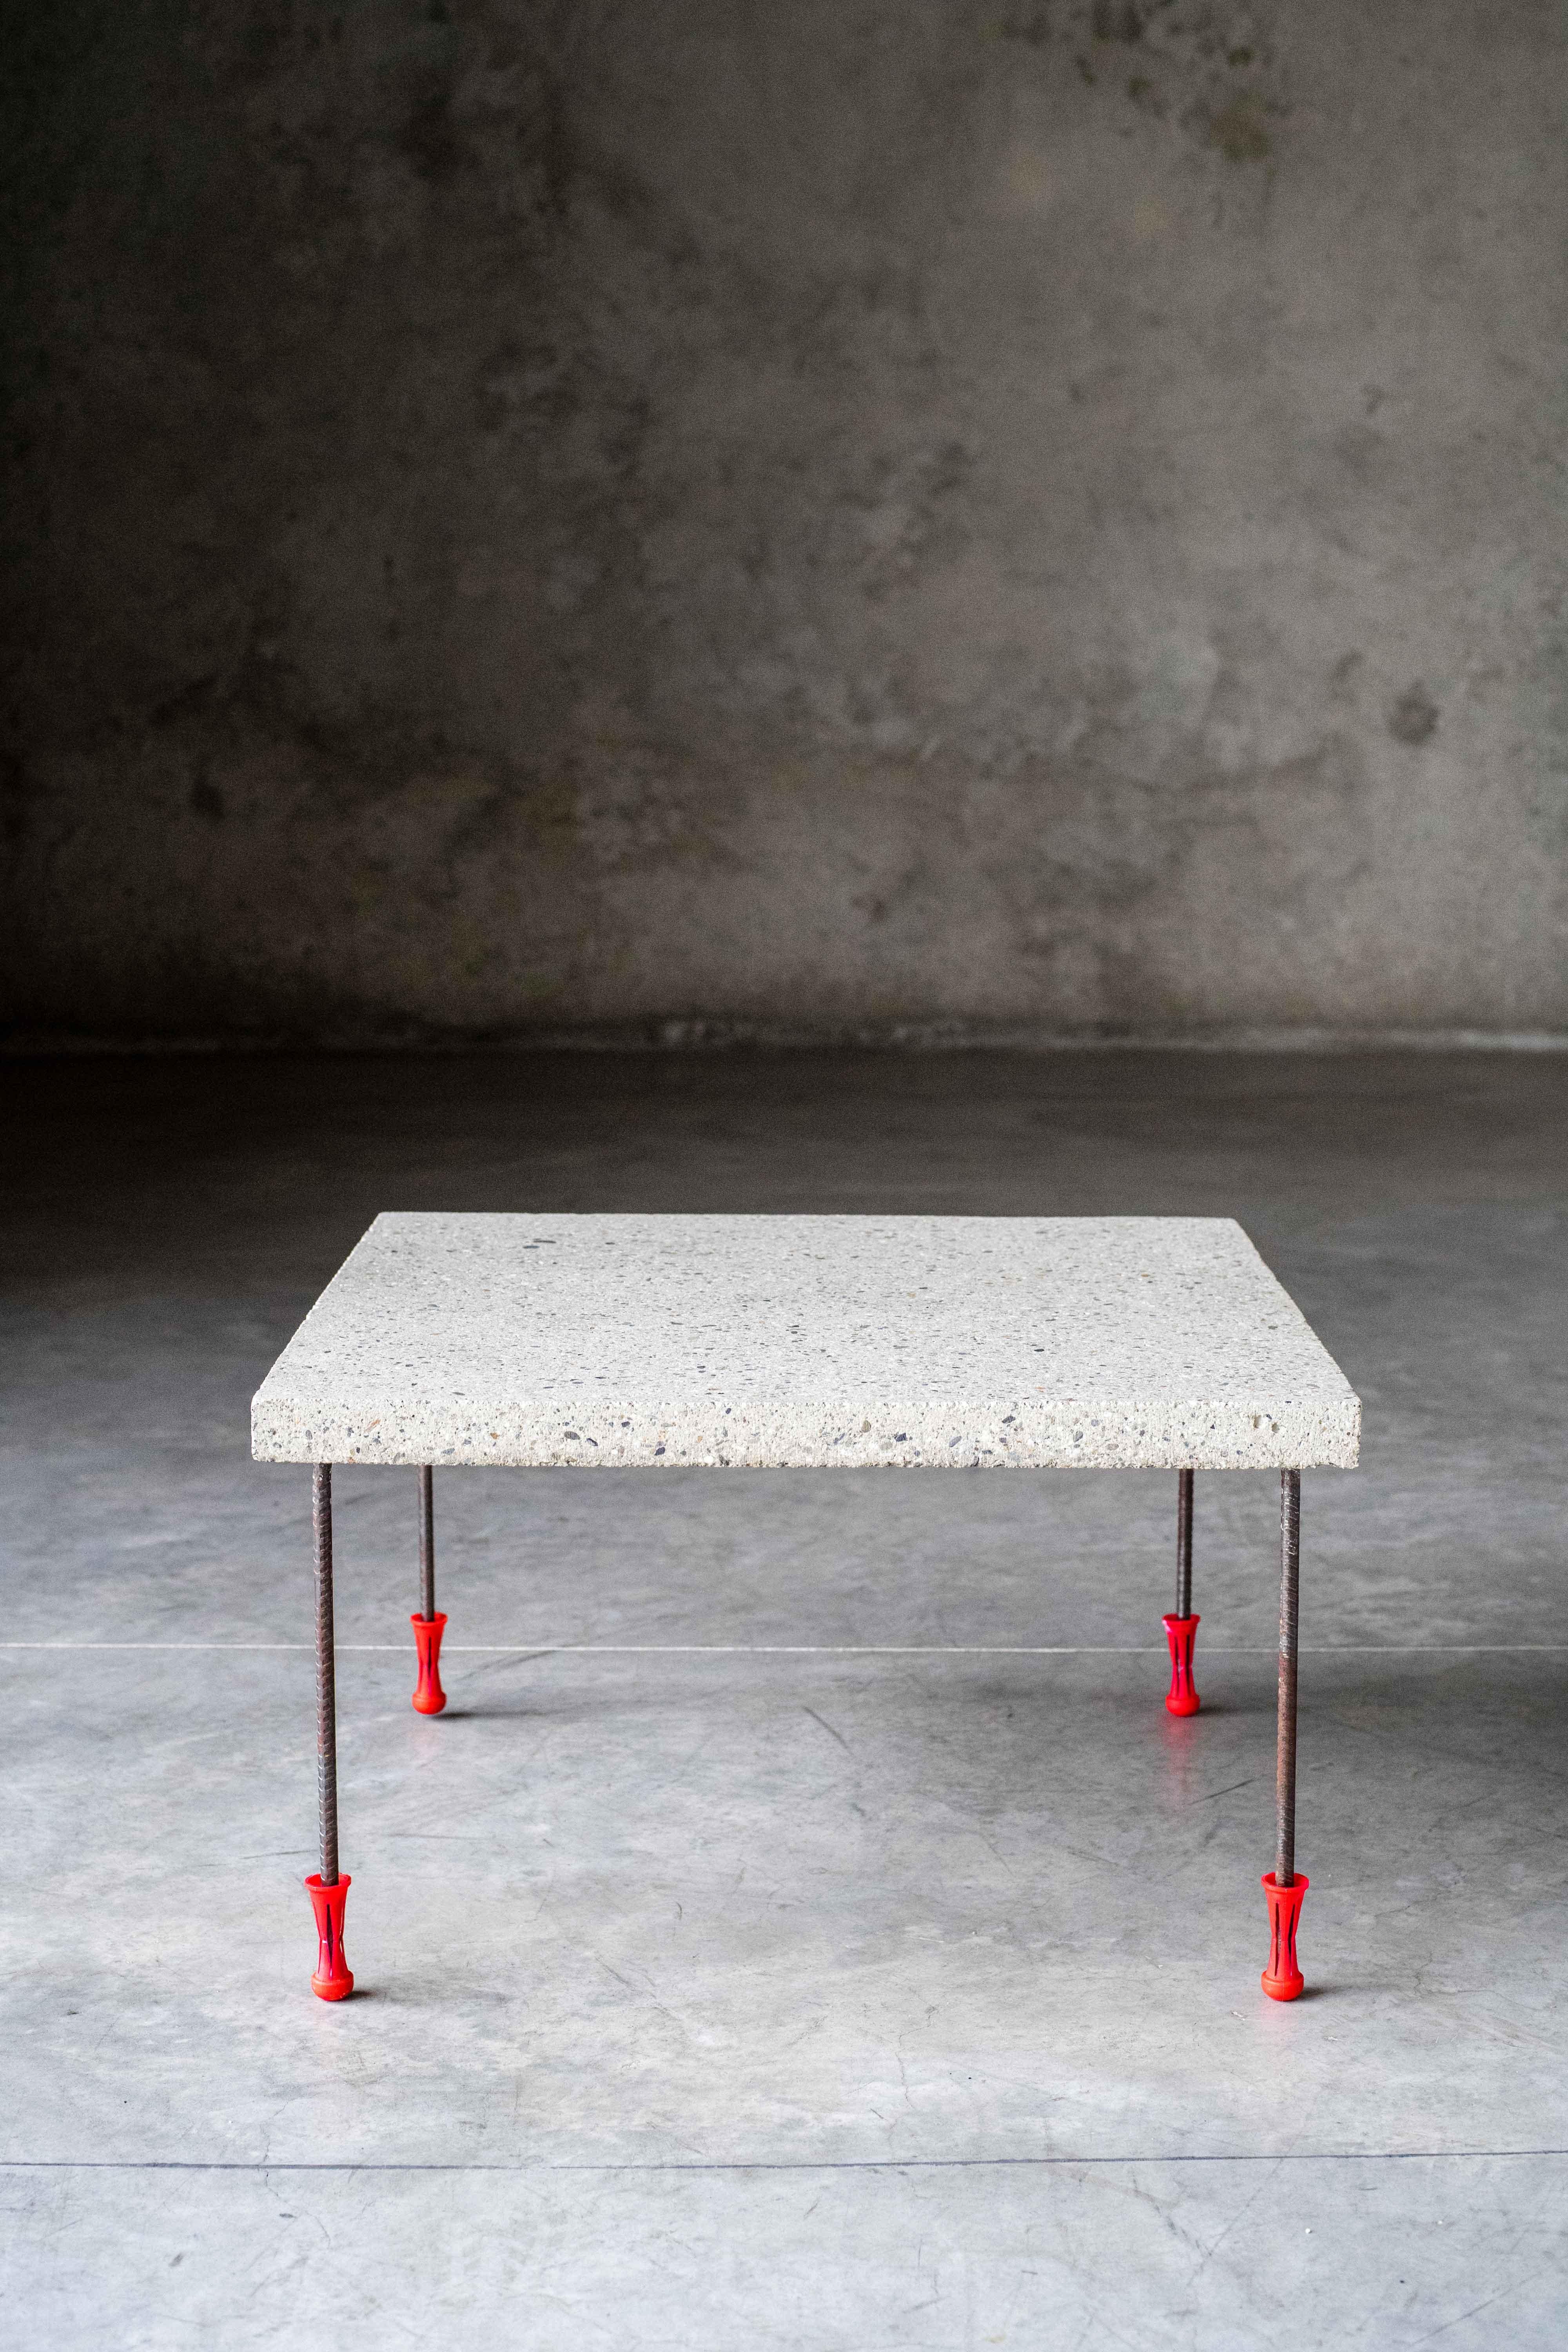 Mason's table by MOB 
Limited editions of 5 + 1 prototype
Designer: BAST (France)
Dimensions: H 75 x D 60 x W 60 cm
Material: concrete

The mason’s table is conceived to be built by any mason. It uses basic construction materials that can be